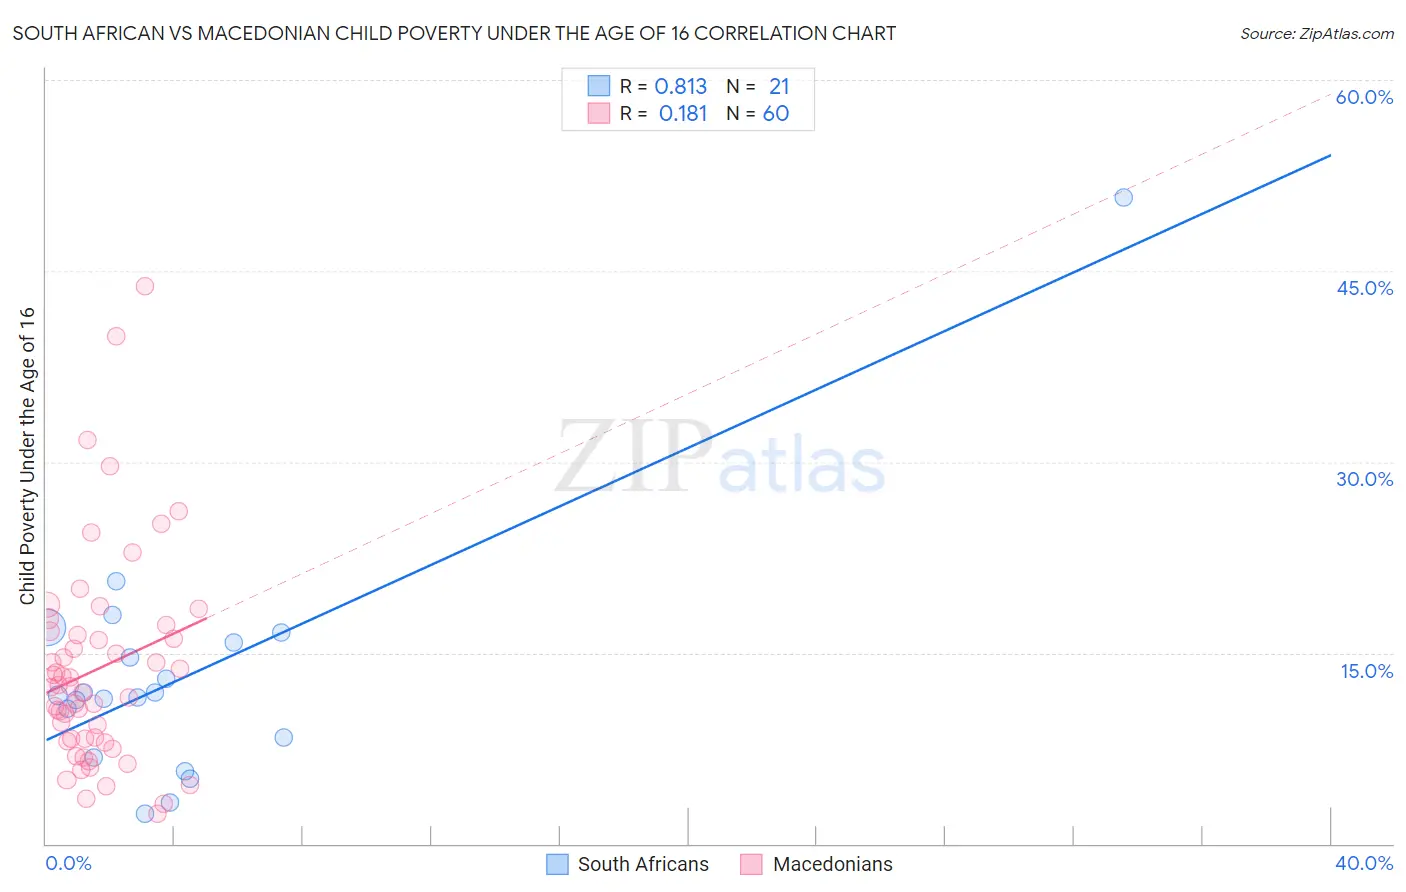 South African vs Macedonian Child Poverty Under the Age of 16